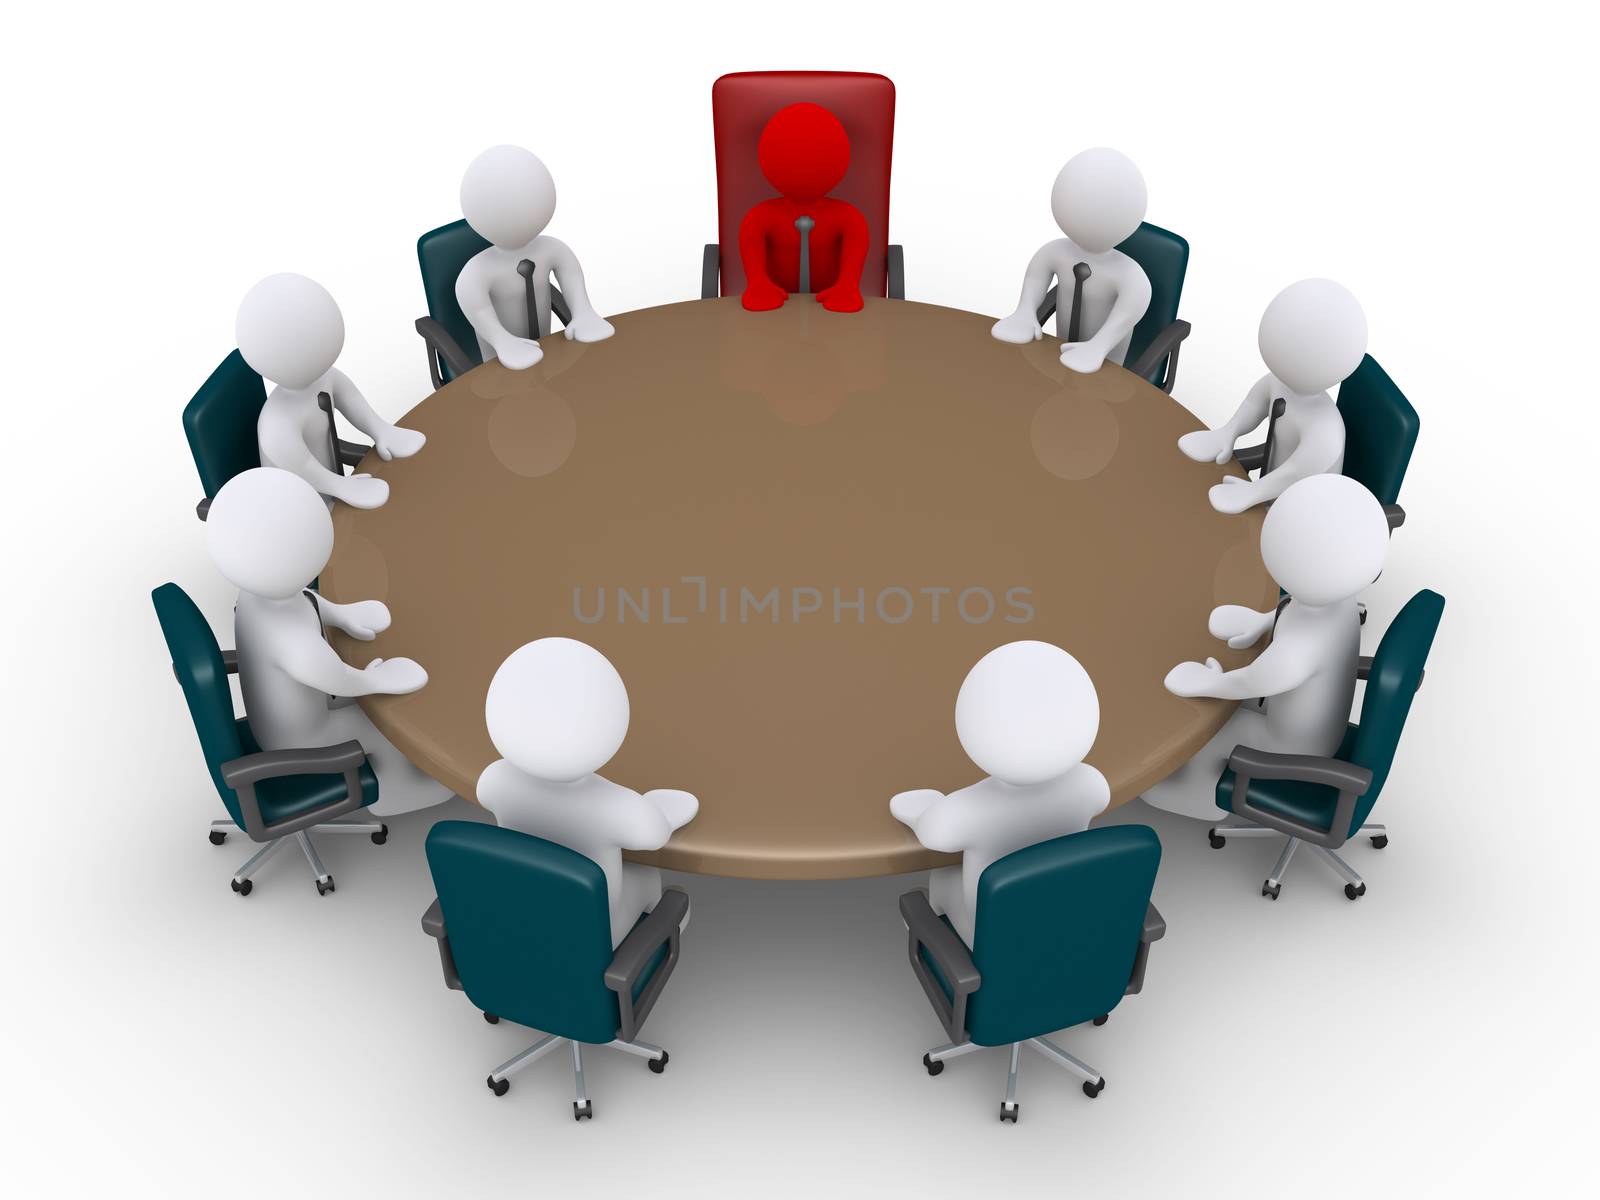 Boss and businessmen in a meeting by 6kor3dos